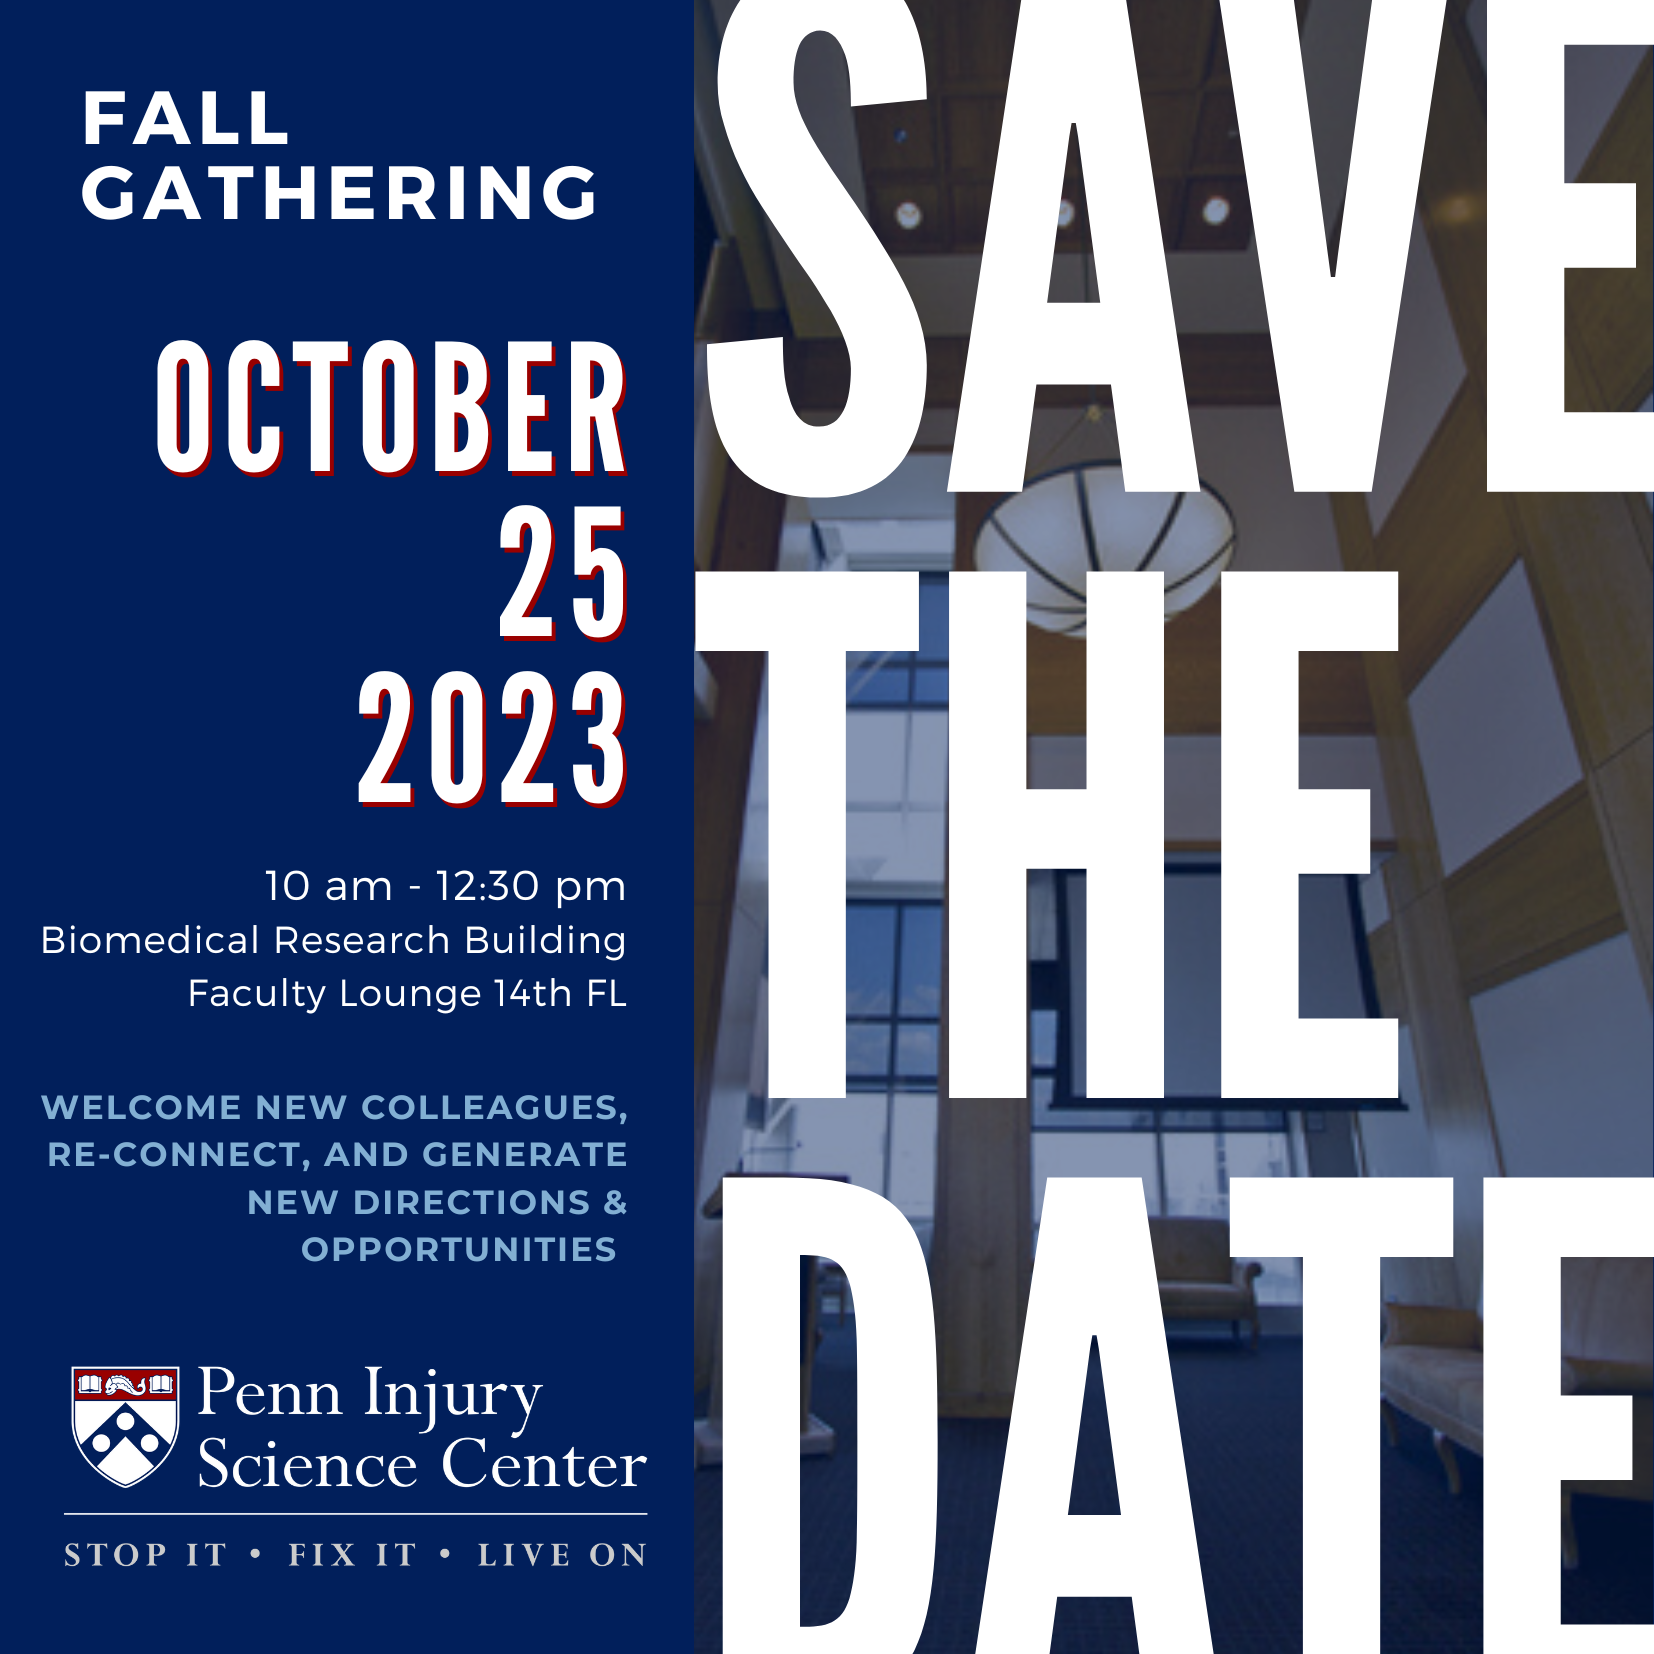 Fall Gathering of the Penn Injury Science Center